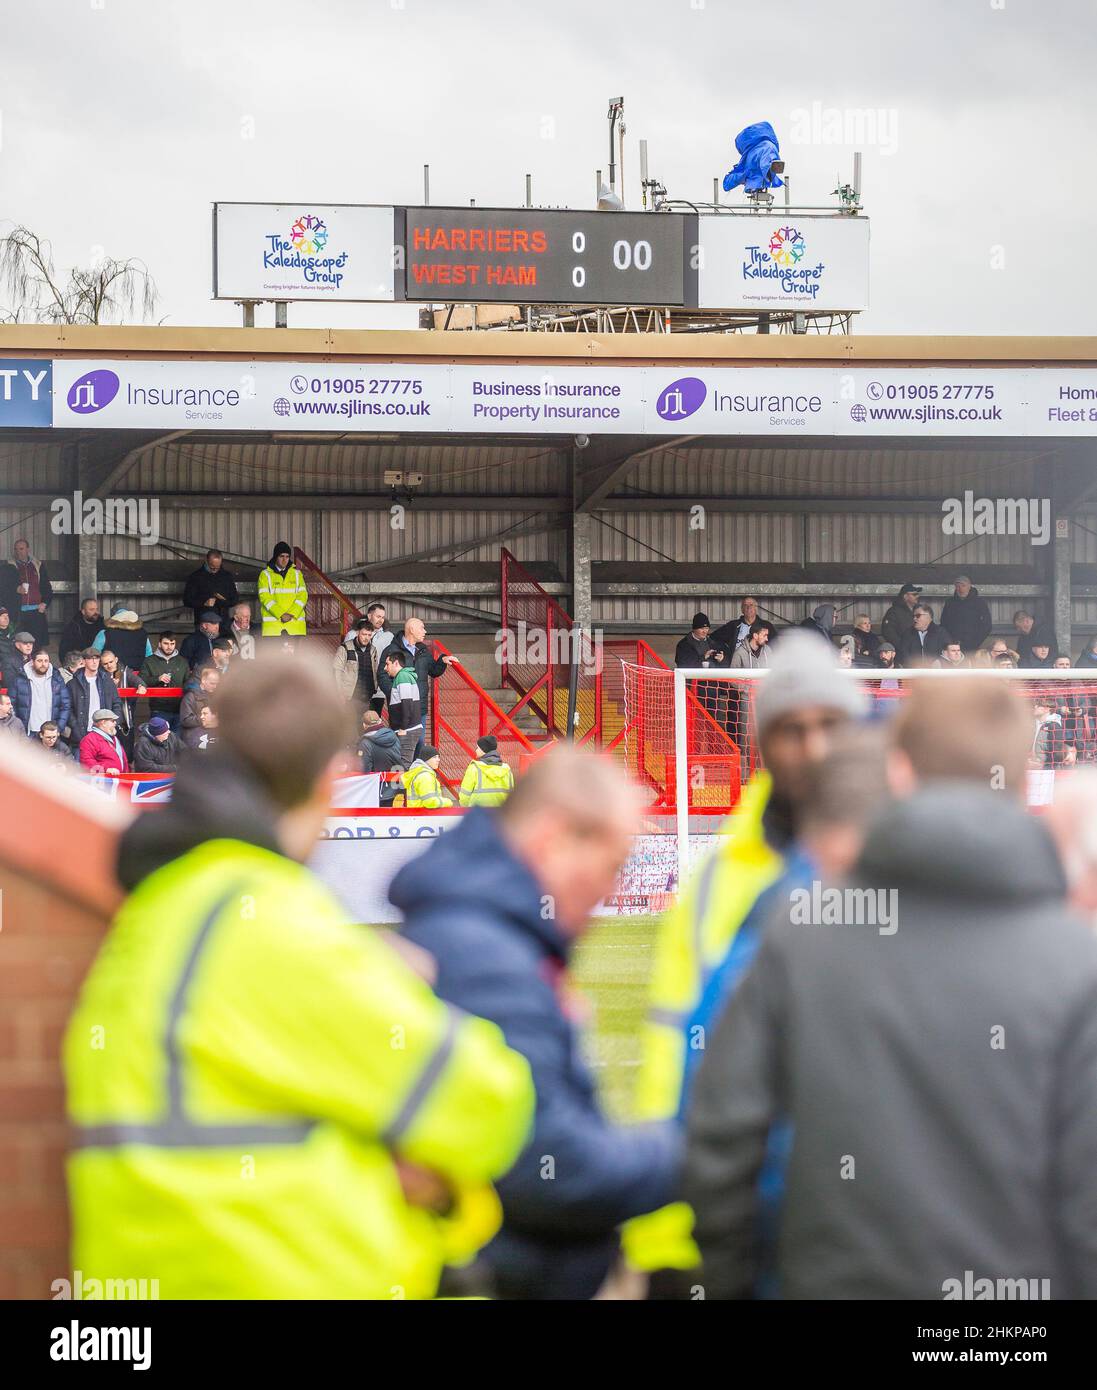 Kidderminster, UK. 5th February, 2022.. Giant killers Kidderminster Harriers Football Club take on premier league West Ham United in the FA Cup fourth round at Kidderminster's Aggborough stadium. Excited fans flock to see this momentus game hoping for victory for the Kiddy Harriers team currently the lowest ranked team in the competition.  Credit: Lee Hudson/Alamy Live News Stock Photo